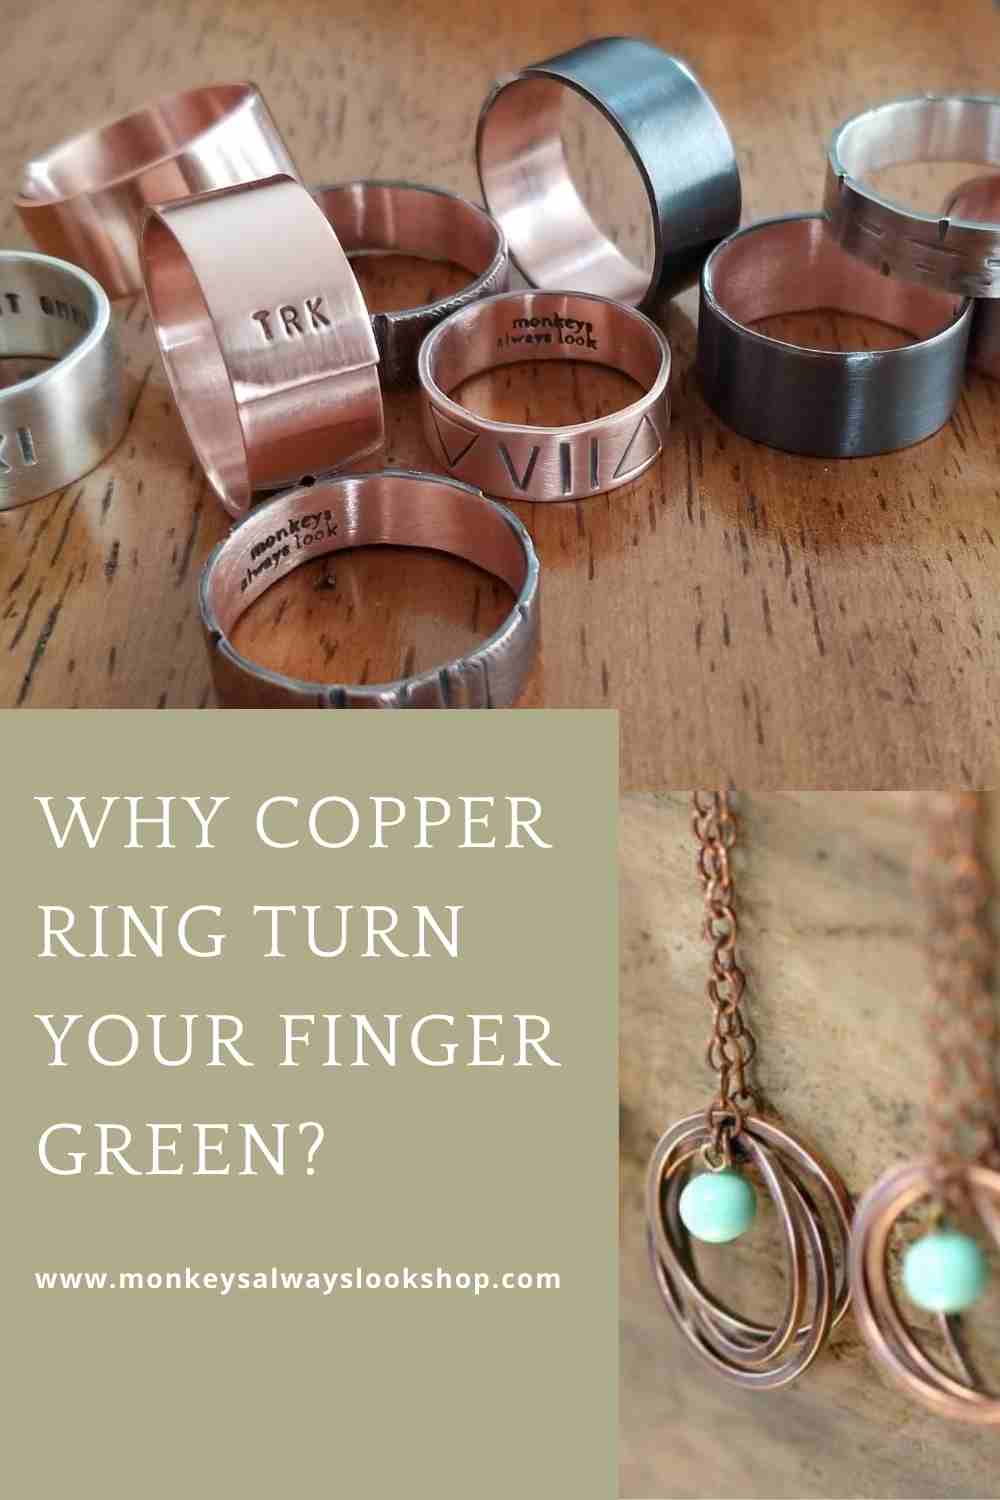 Why Does My Arm Turn Green With Copper Bracelet?